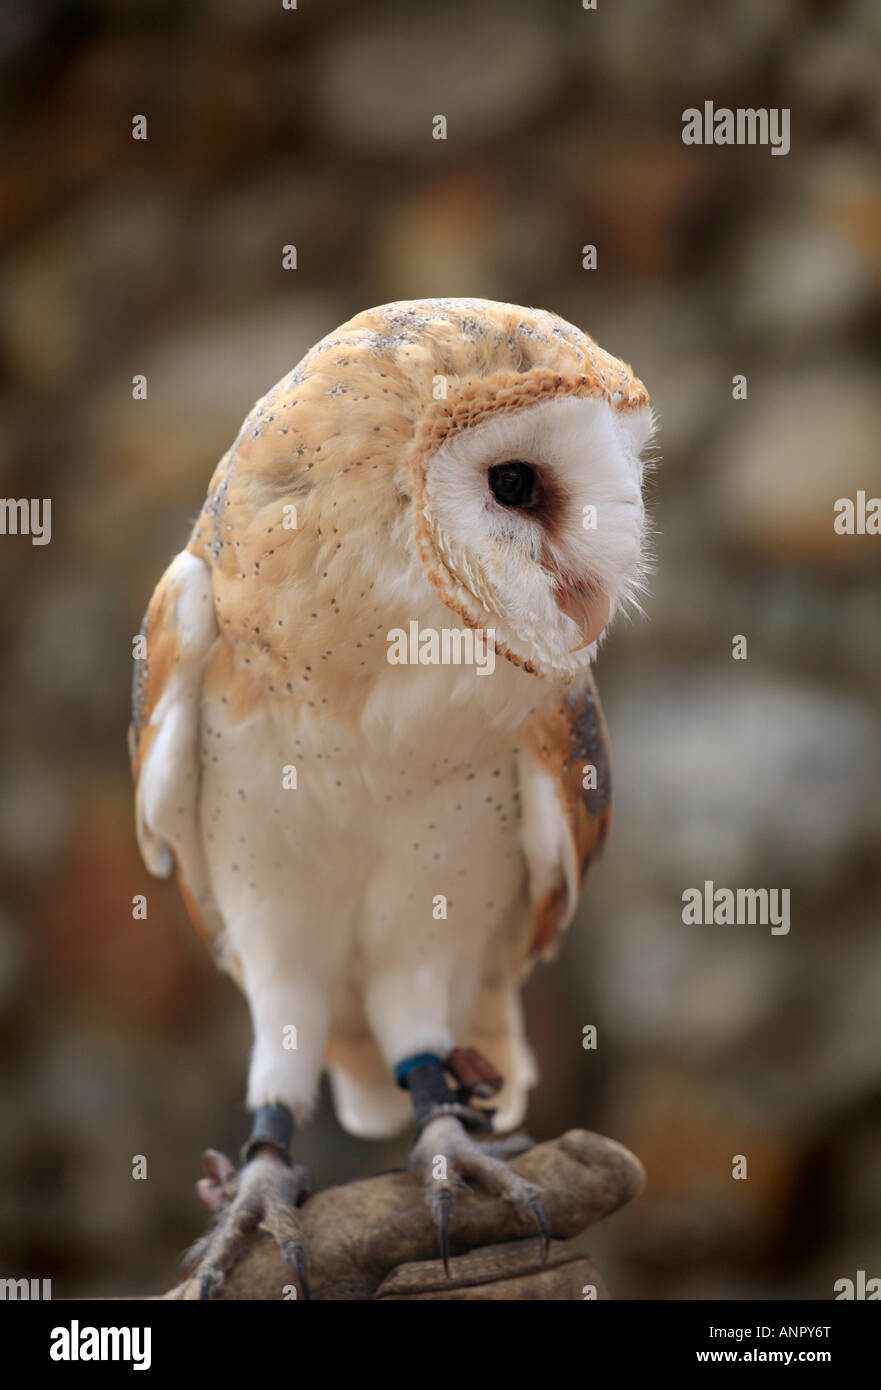 Barn owl resting on a glove. Stock Photo